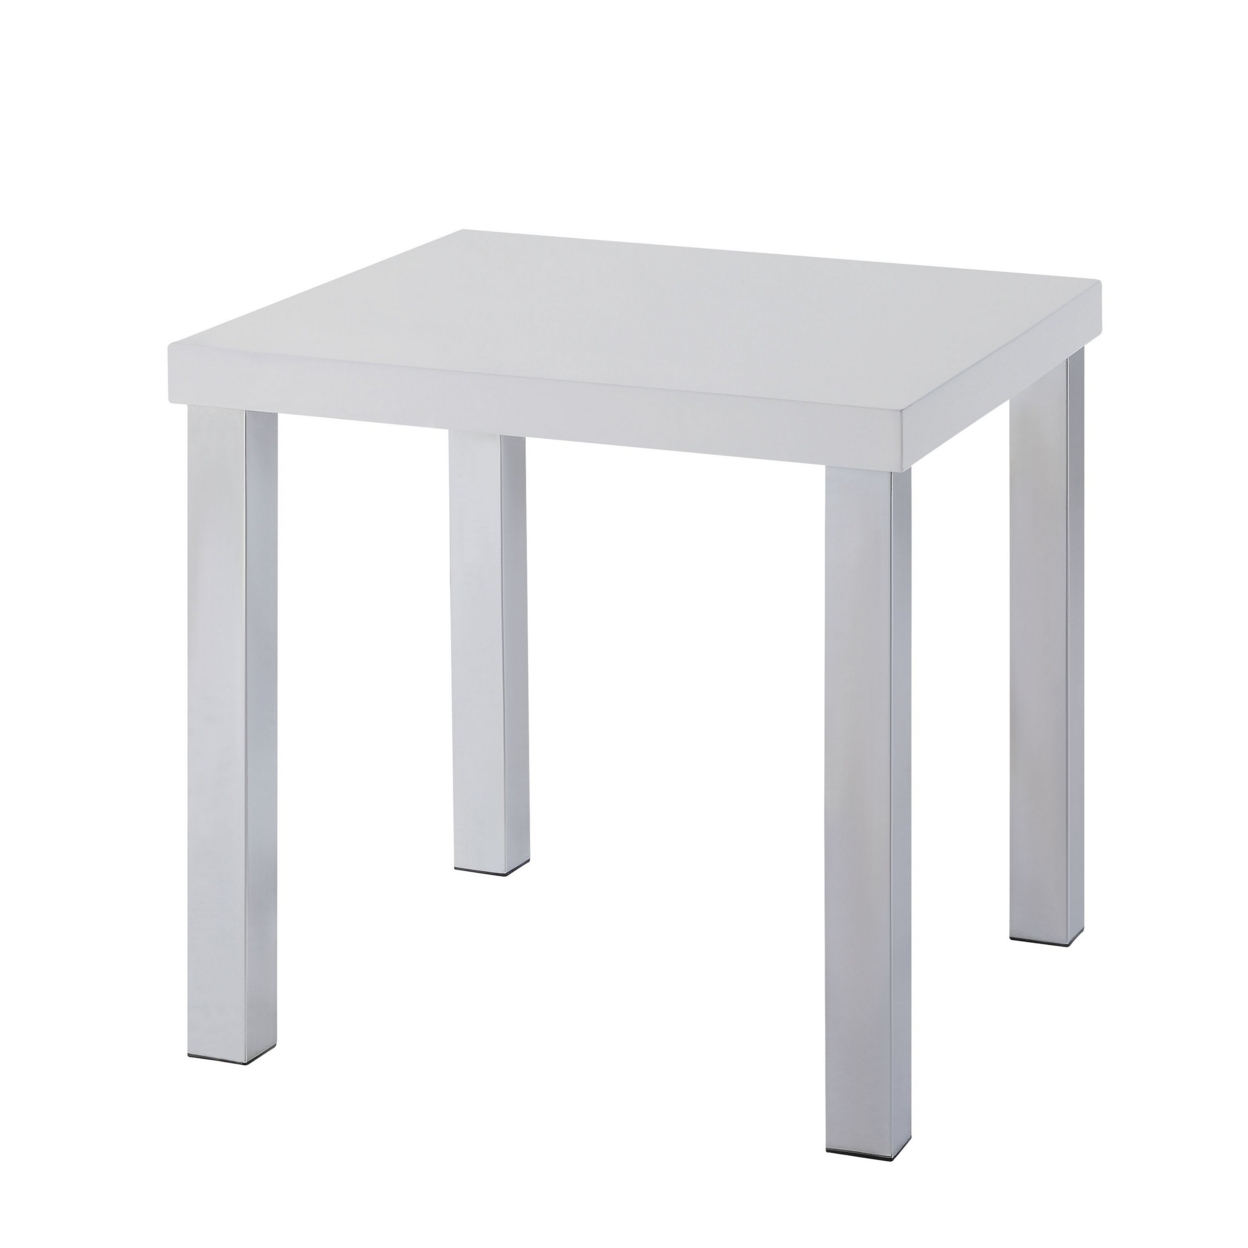 Square Wooden End Table With Straight Metal Legs, White And Chrome- Saltoro Sherpi